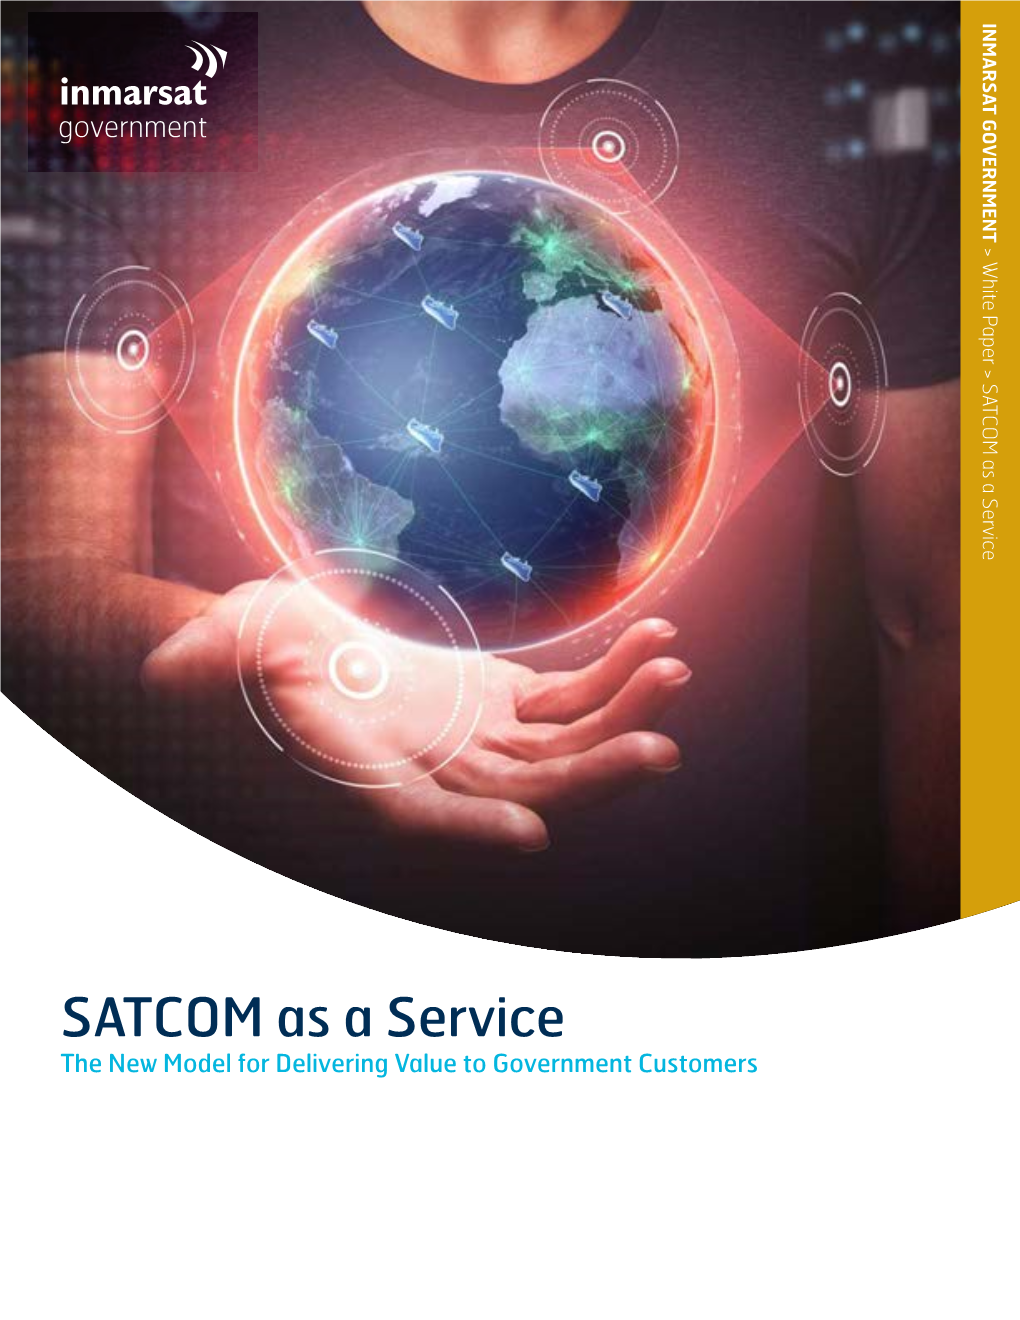 SATCOM As a Service SATCOM As a Service SATCOM to Government Customers the New Model for Delivering Value Mobile Centric Strategy- Embraced Model